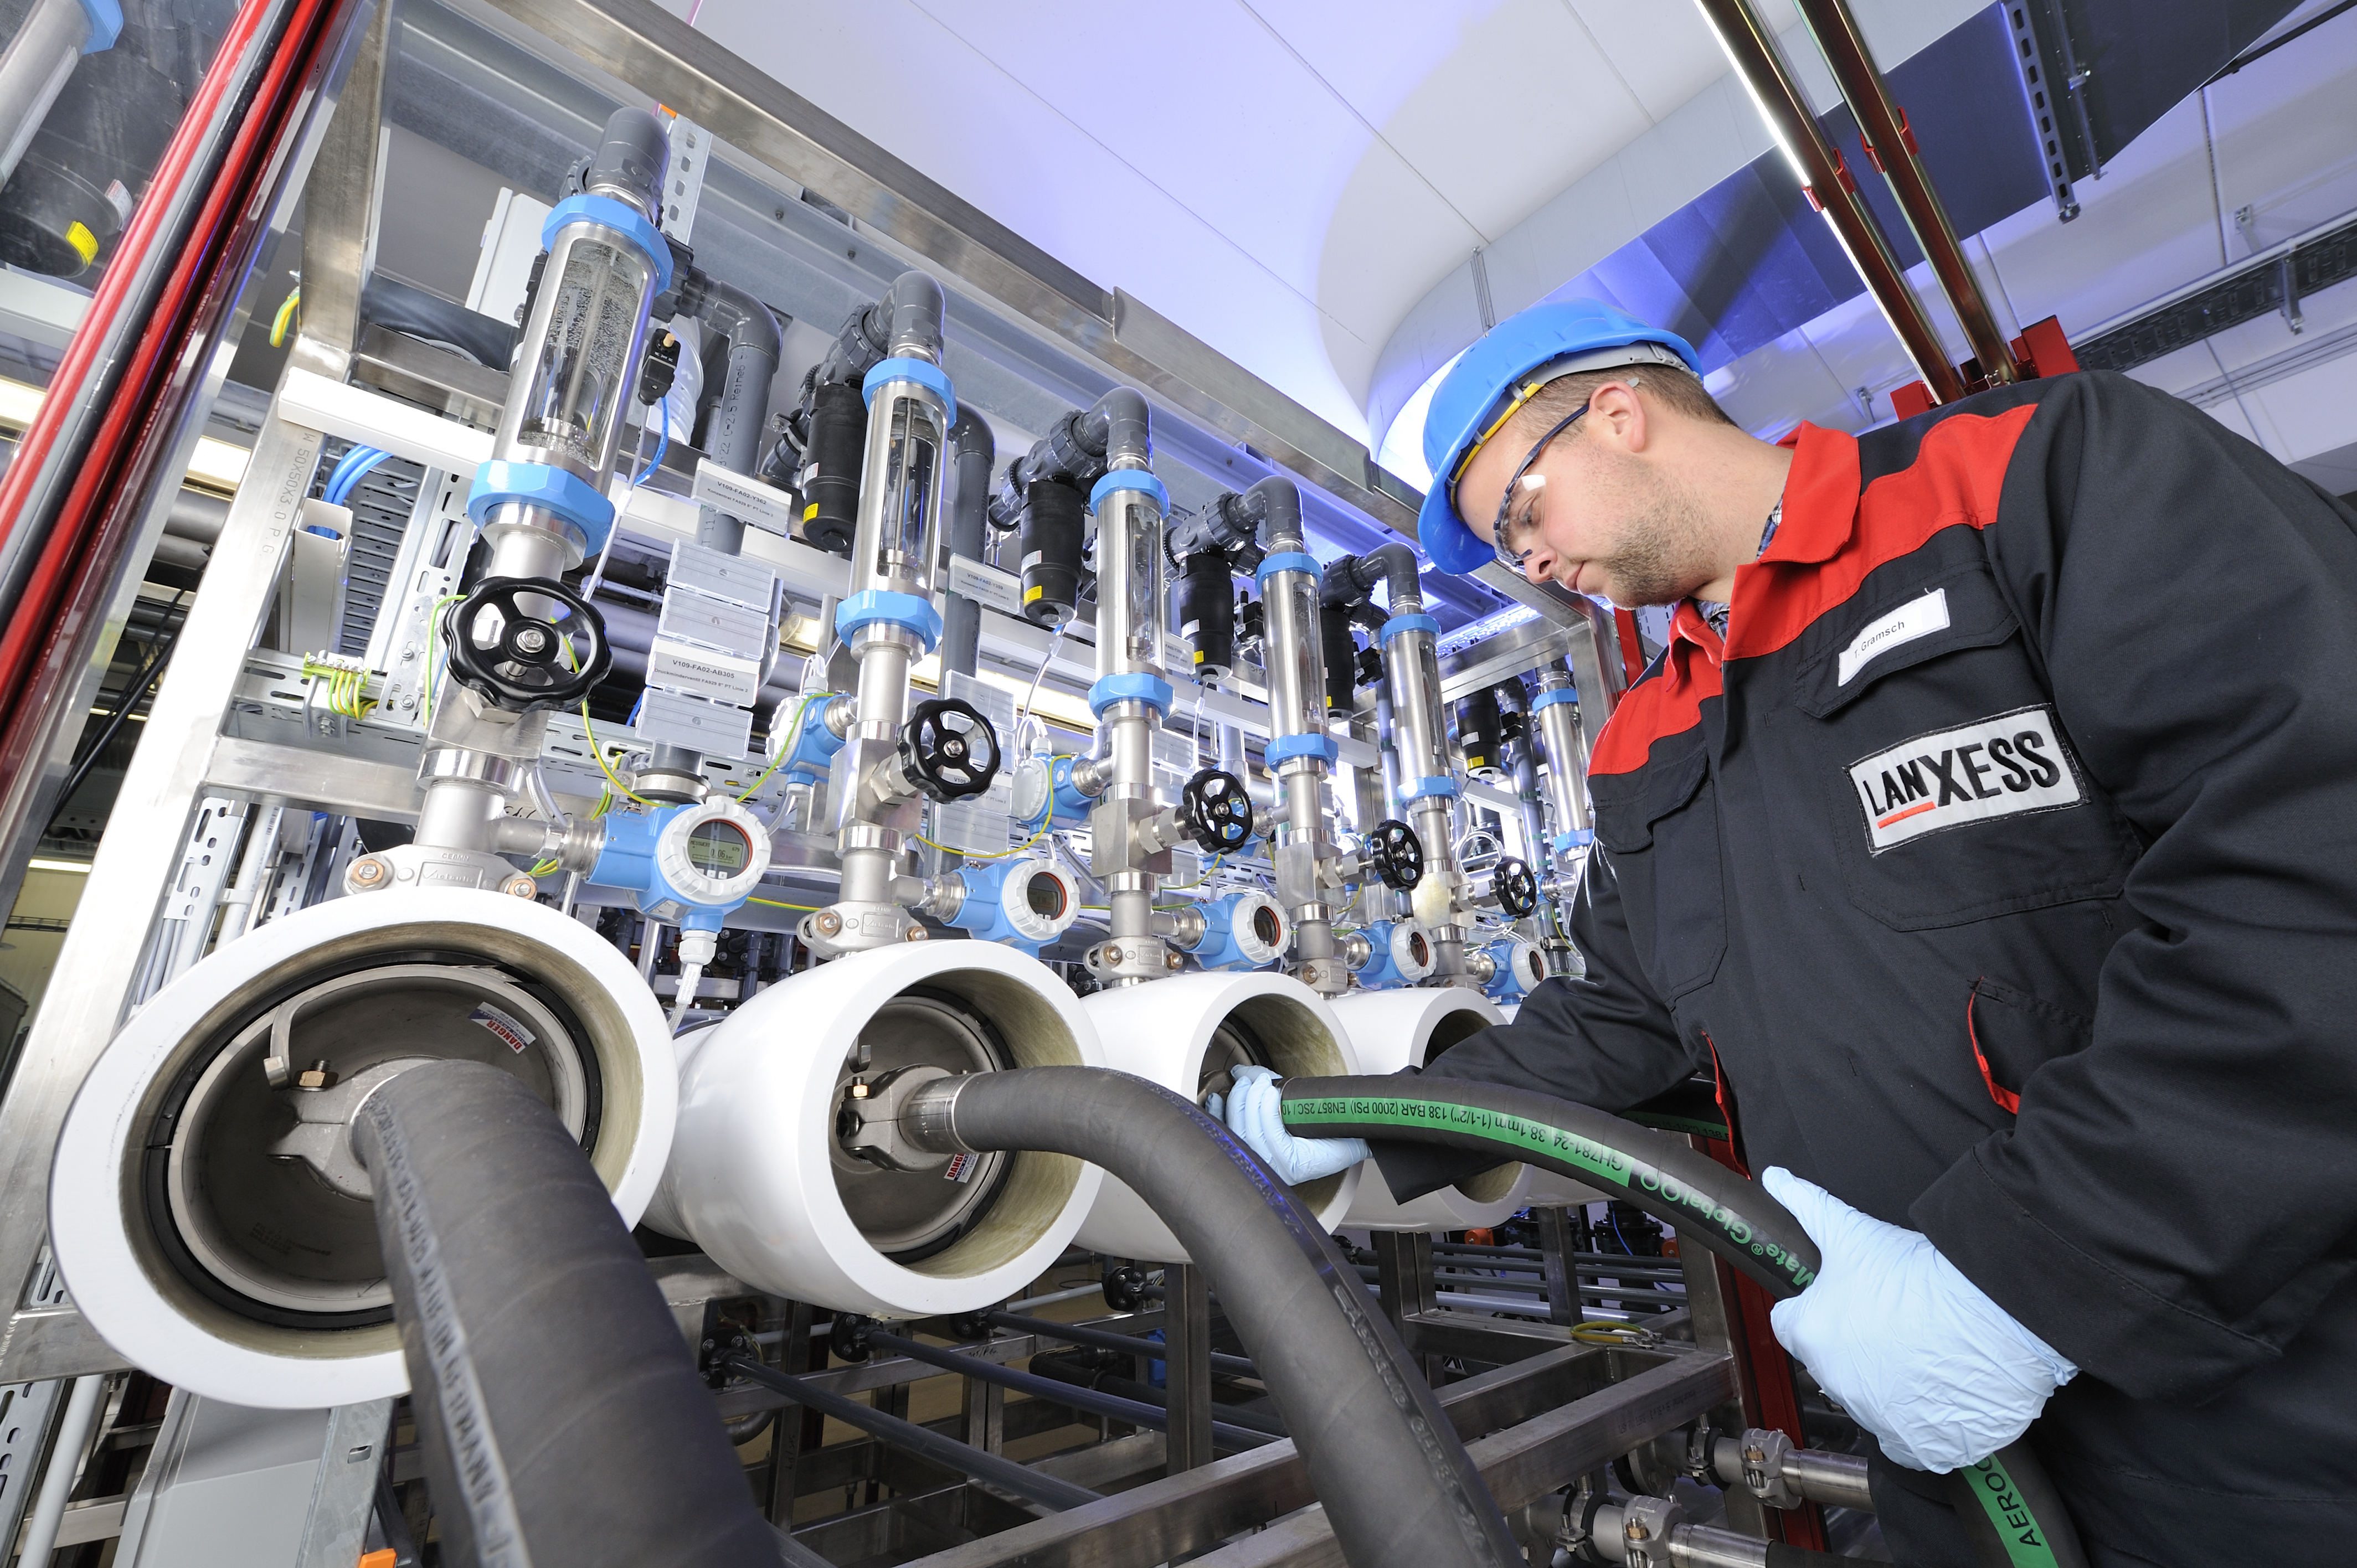 A Lewabrane product is checked in an element tester at the Lanxess site in Bitterfeld, Germany.